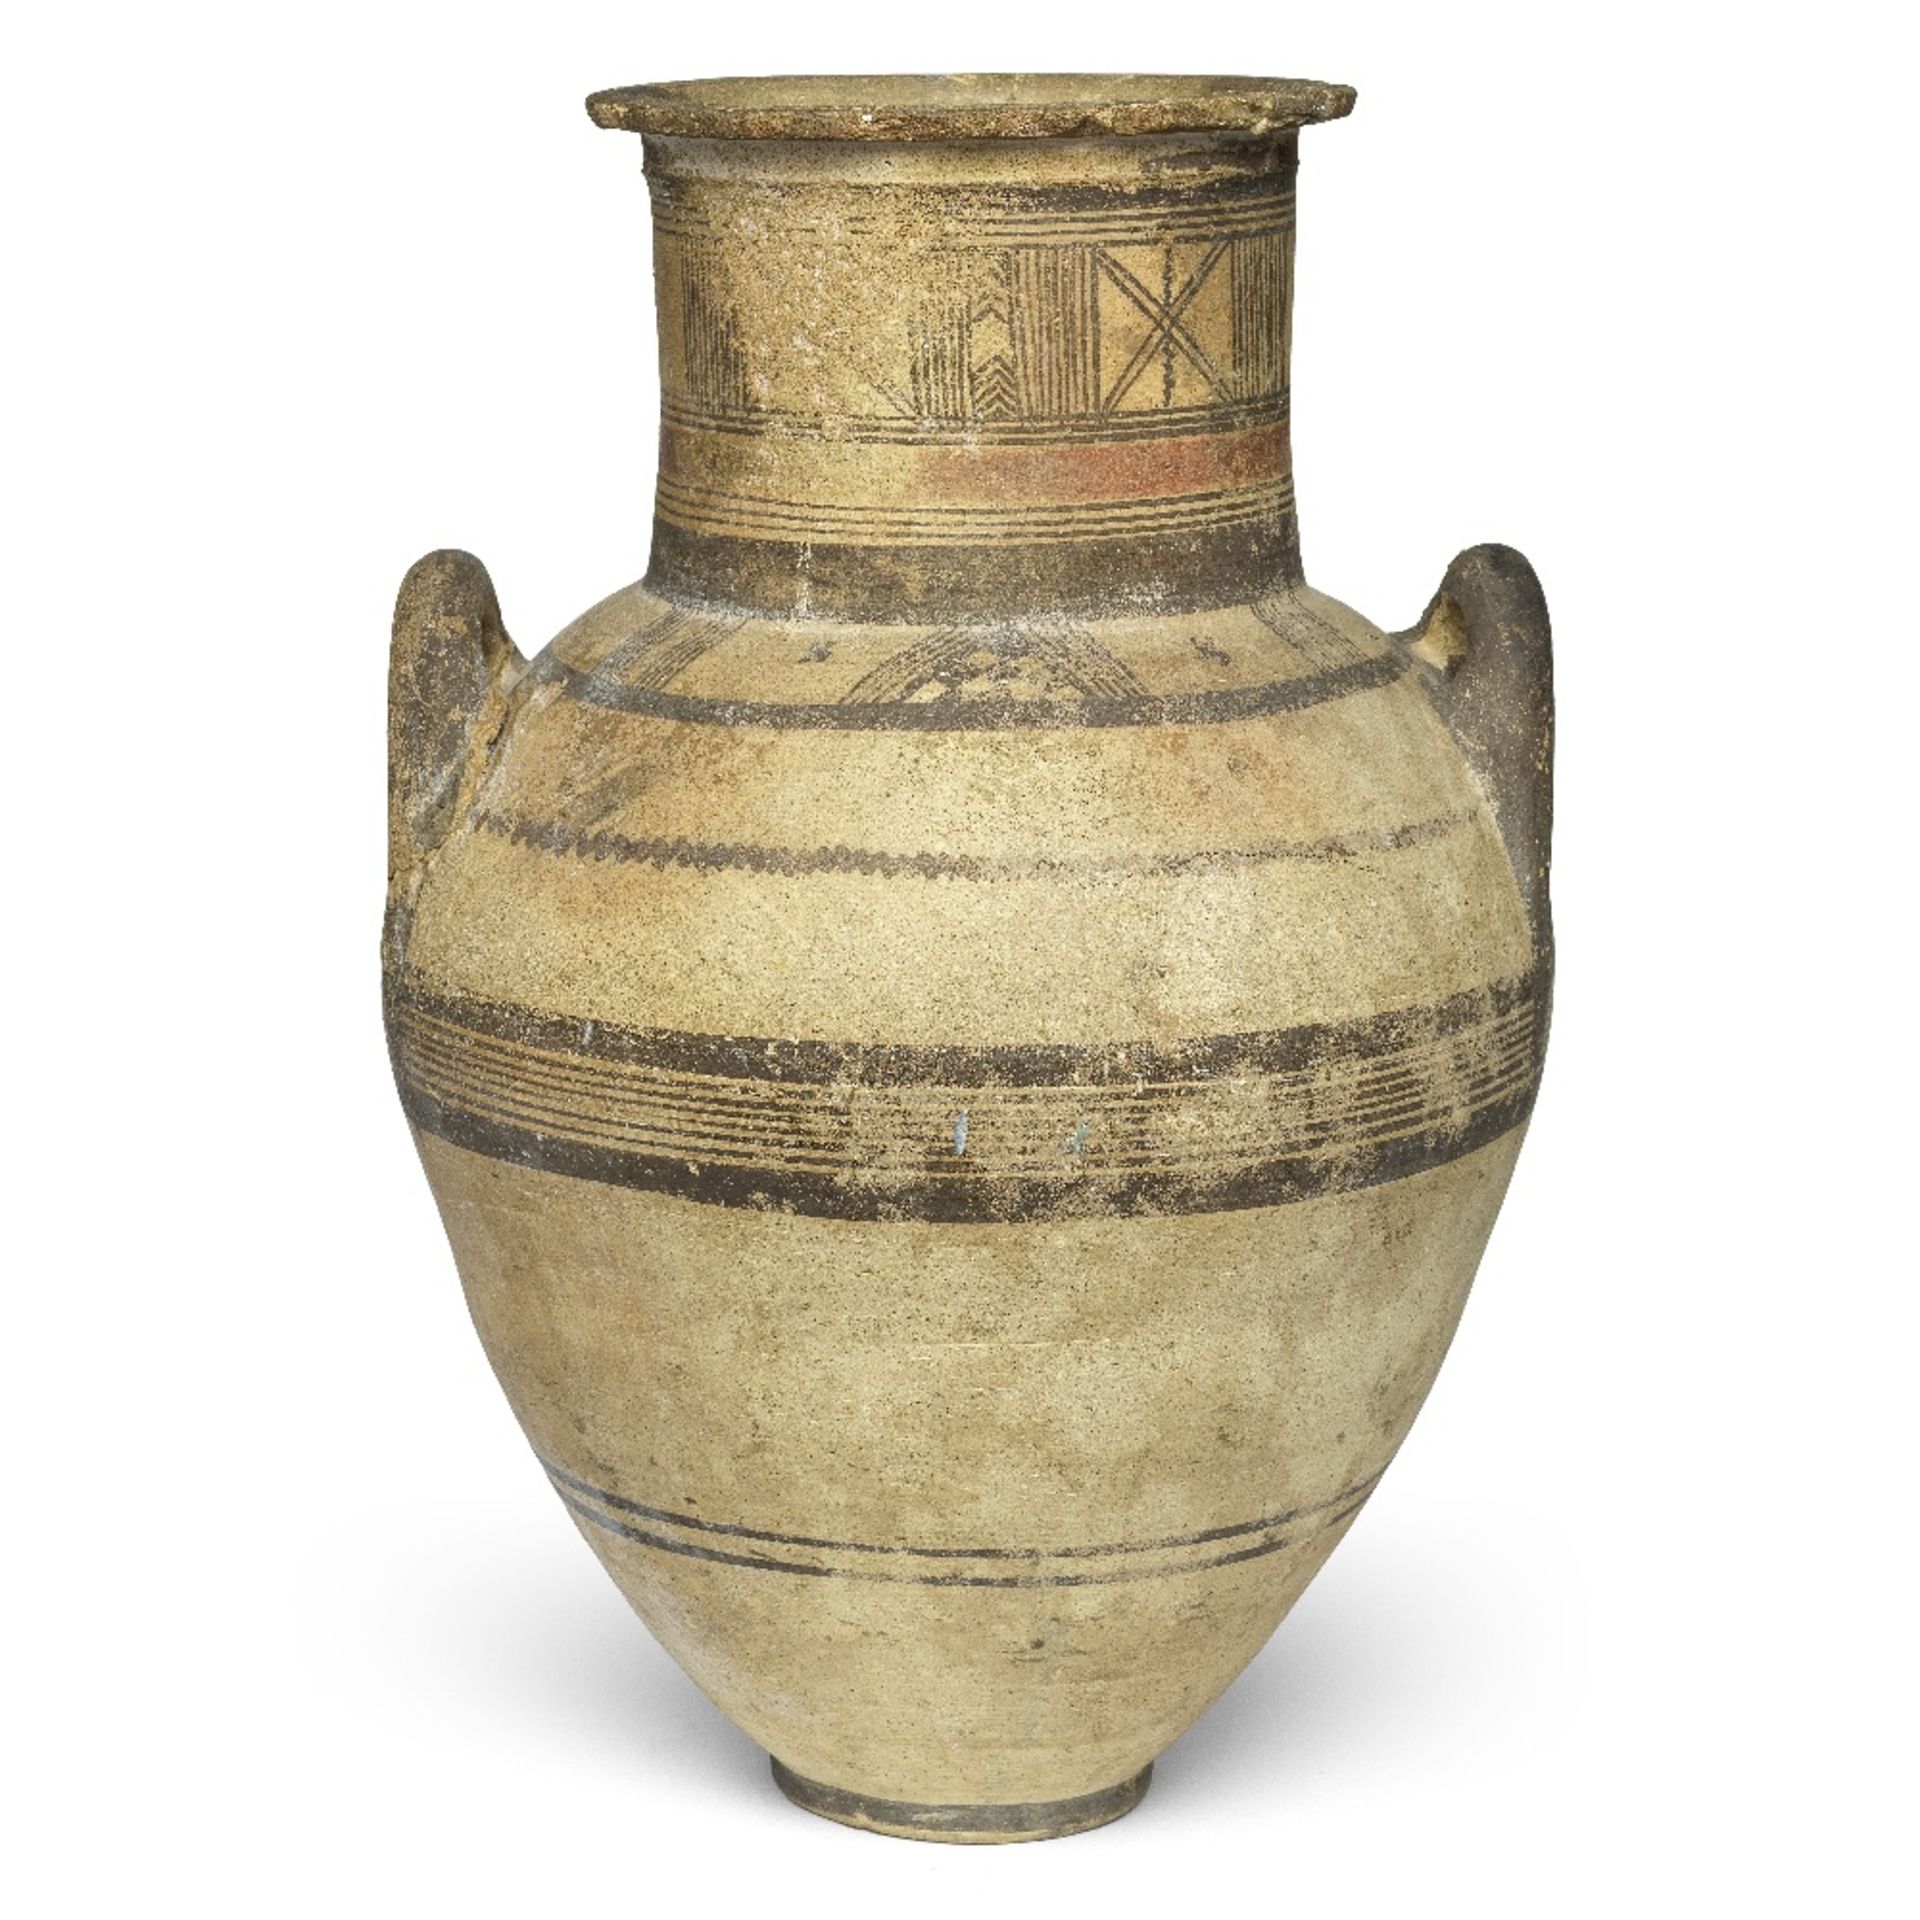 A large Cypriot pottery Bichrome Ware amphora